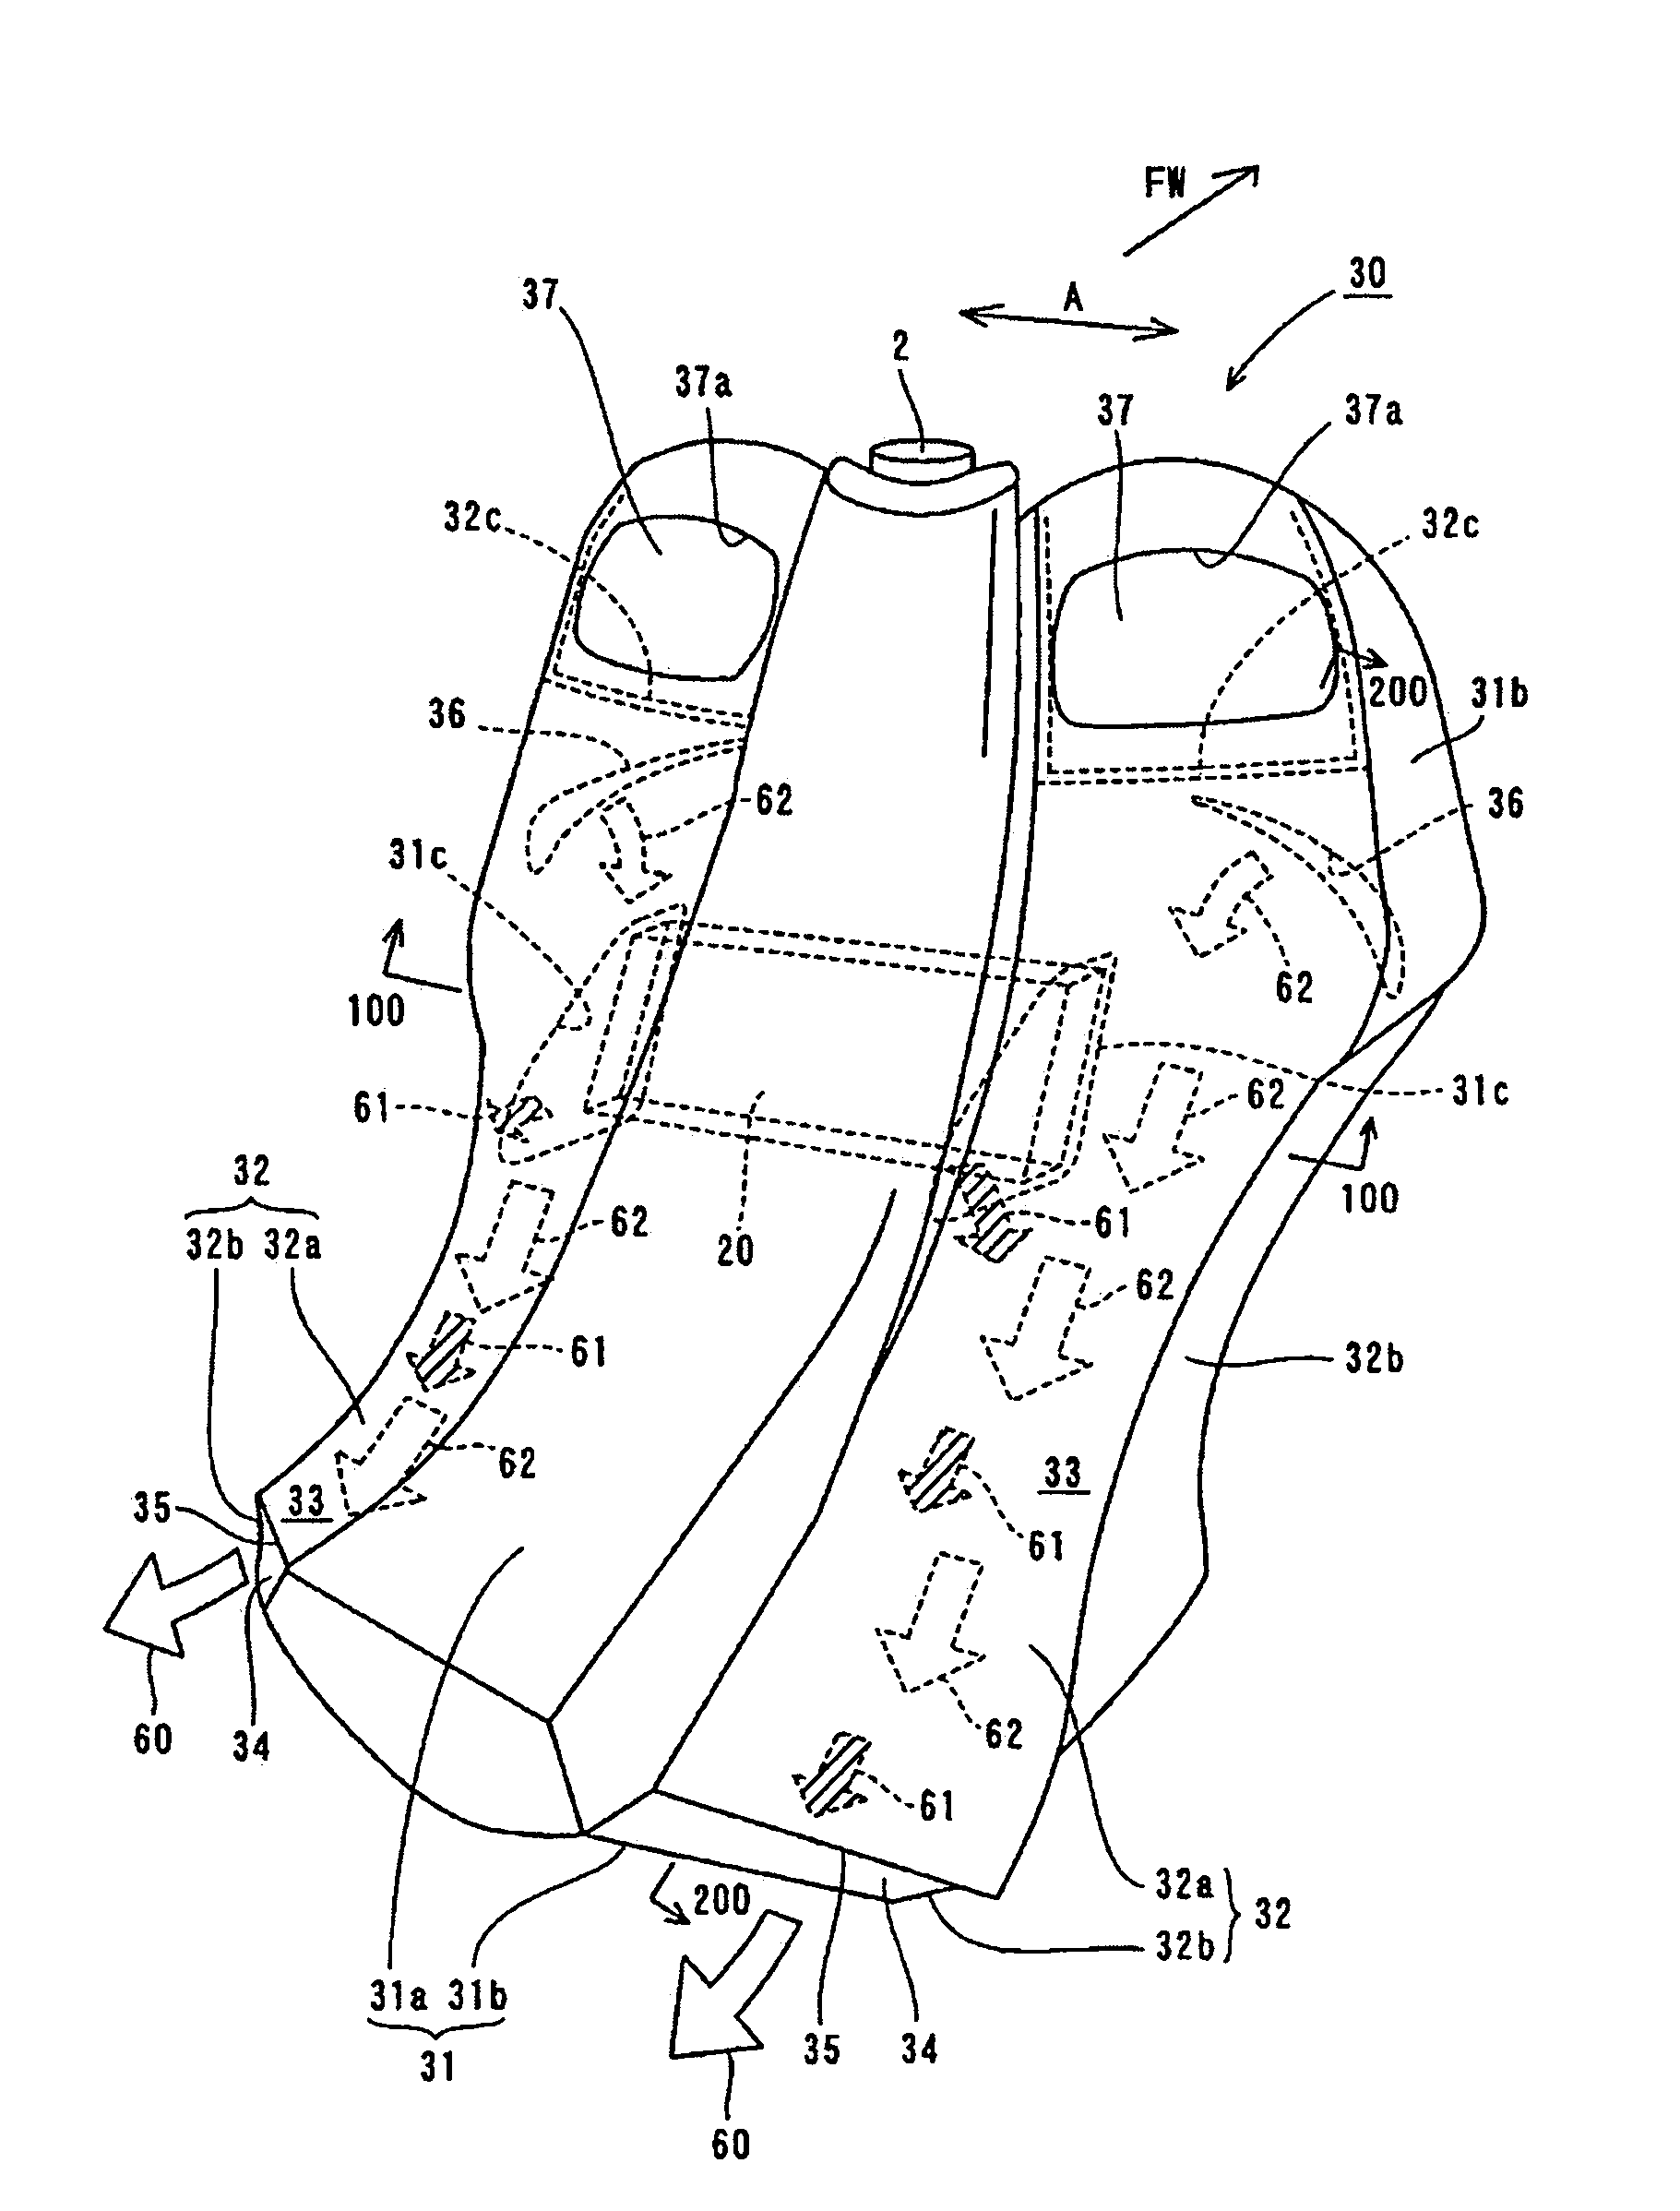 Air guide structure in motor vehicle leg shield